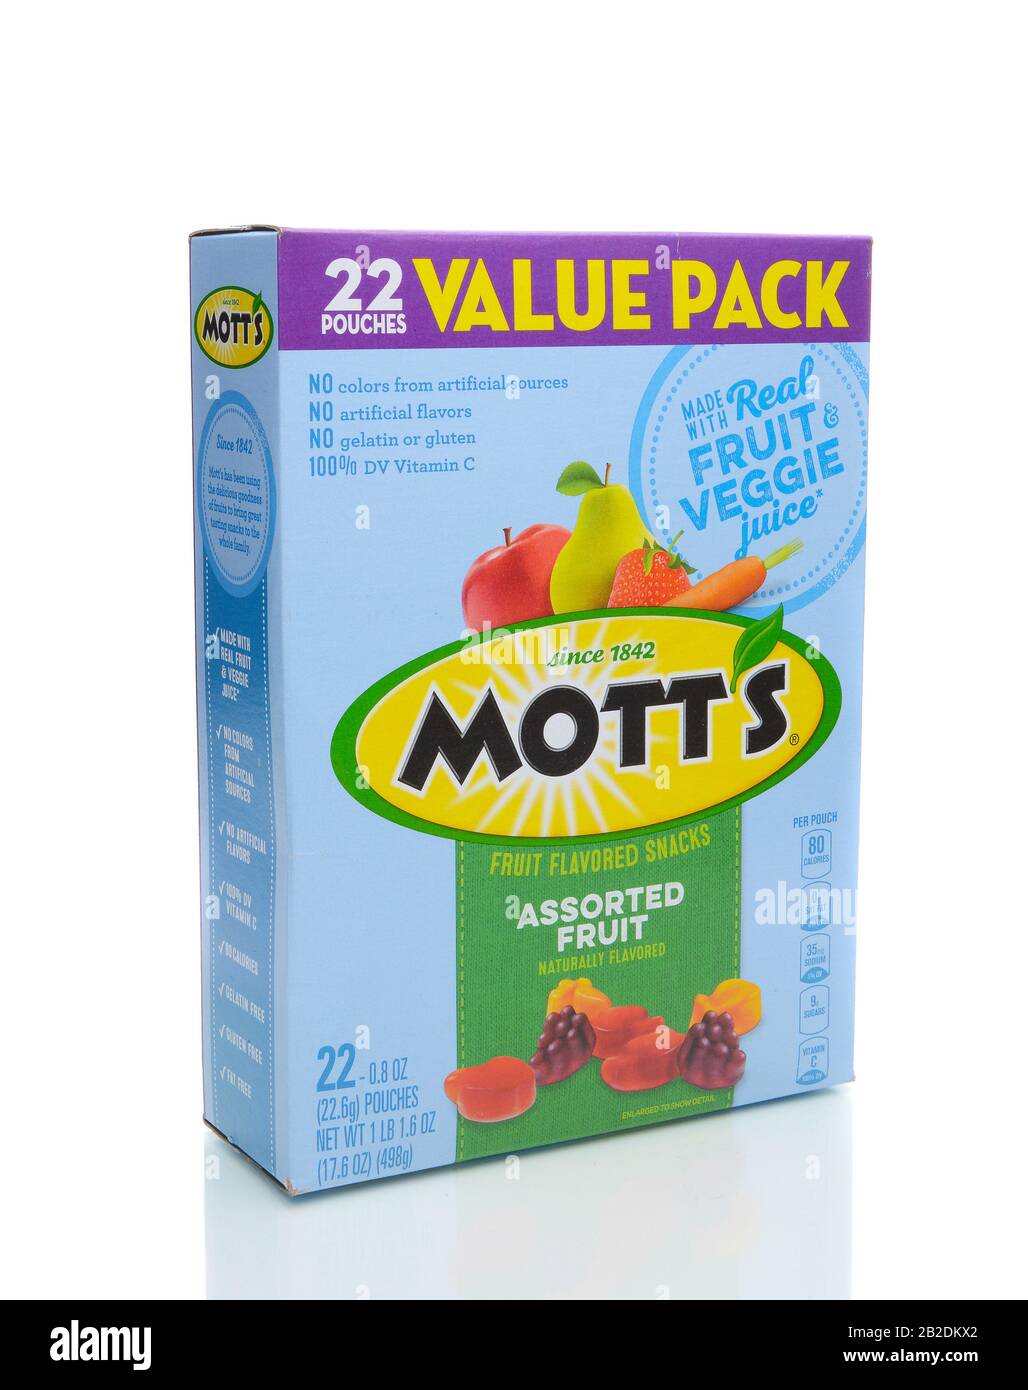 IRVINE, CA - JANUARY 4, 2018: Motts Fruit Flavored Snacks. The tasty treat combines real fruit and vegetable juice in a chewable gummy snack. Stock Photo